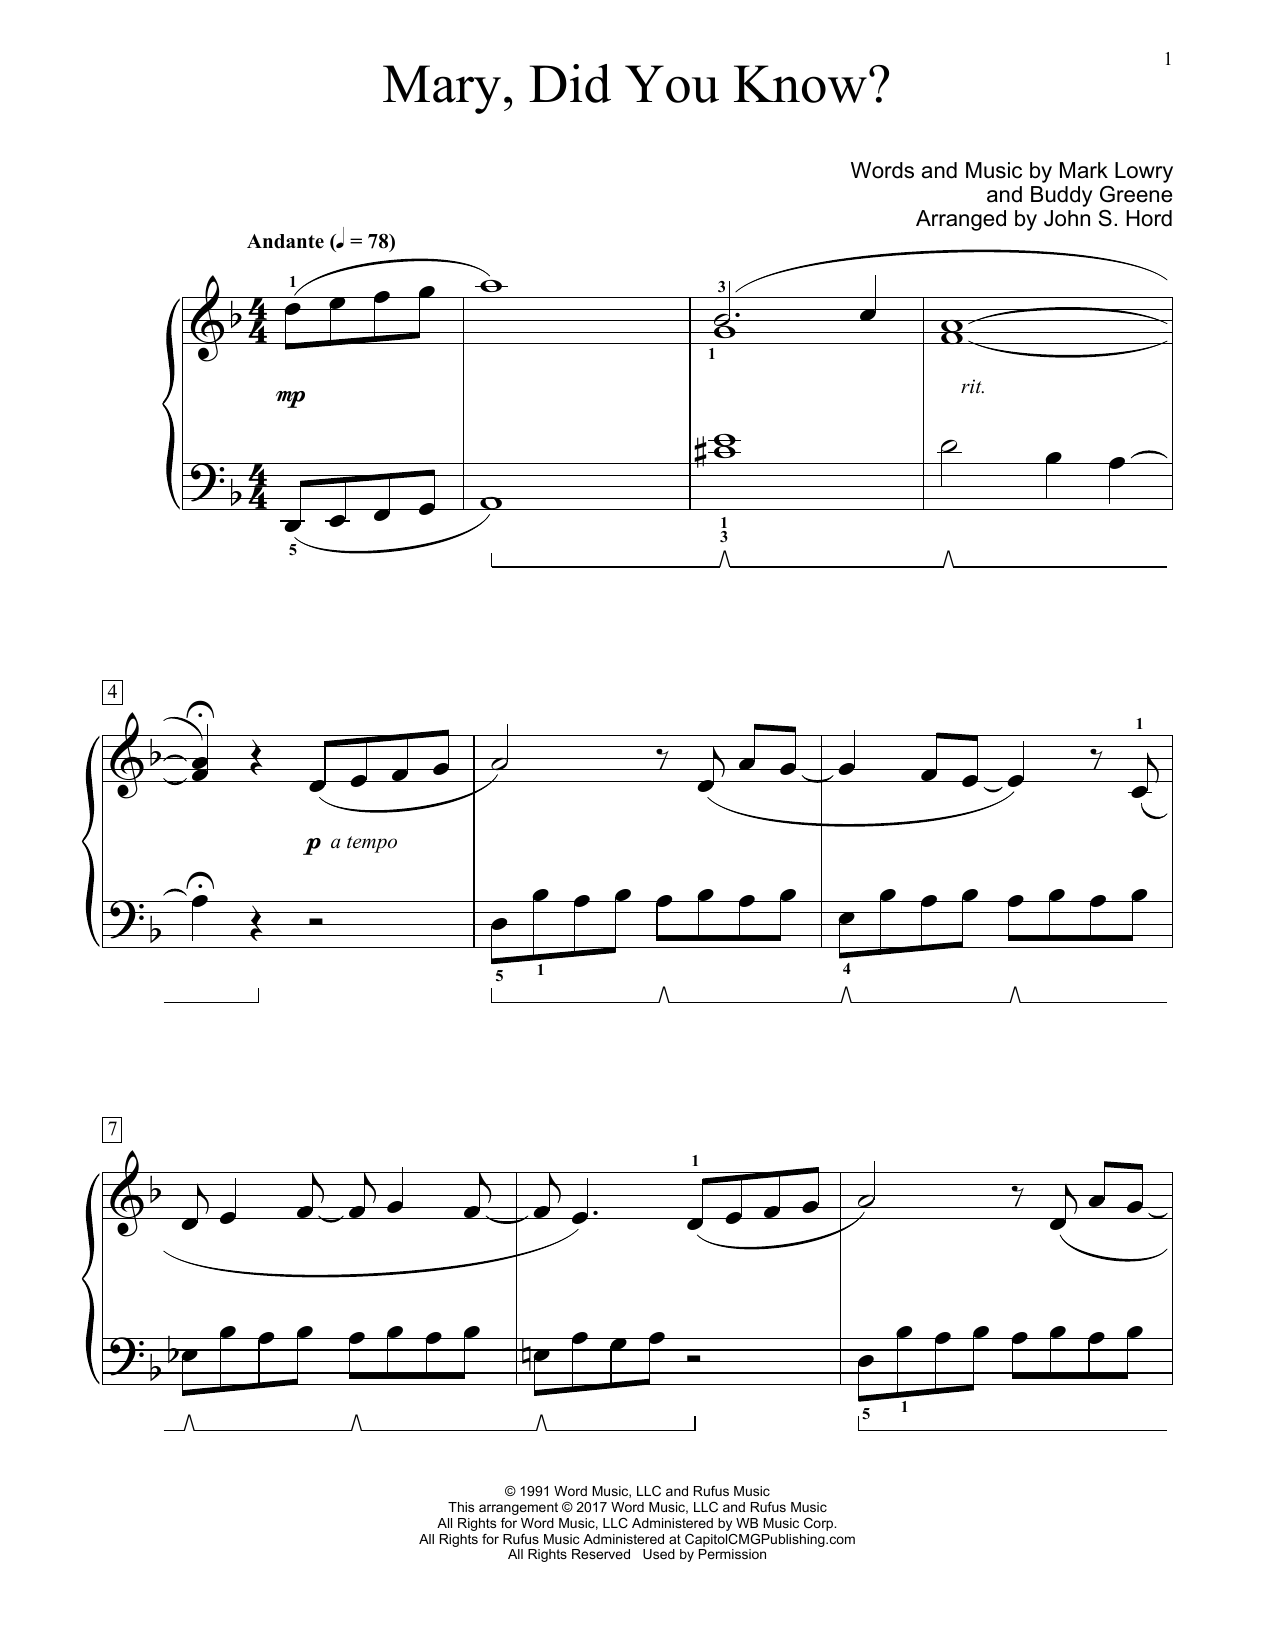 Download John S. Hord Mary, Did You Know? Sheet Music